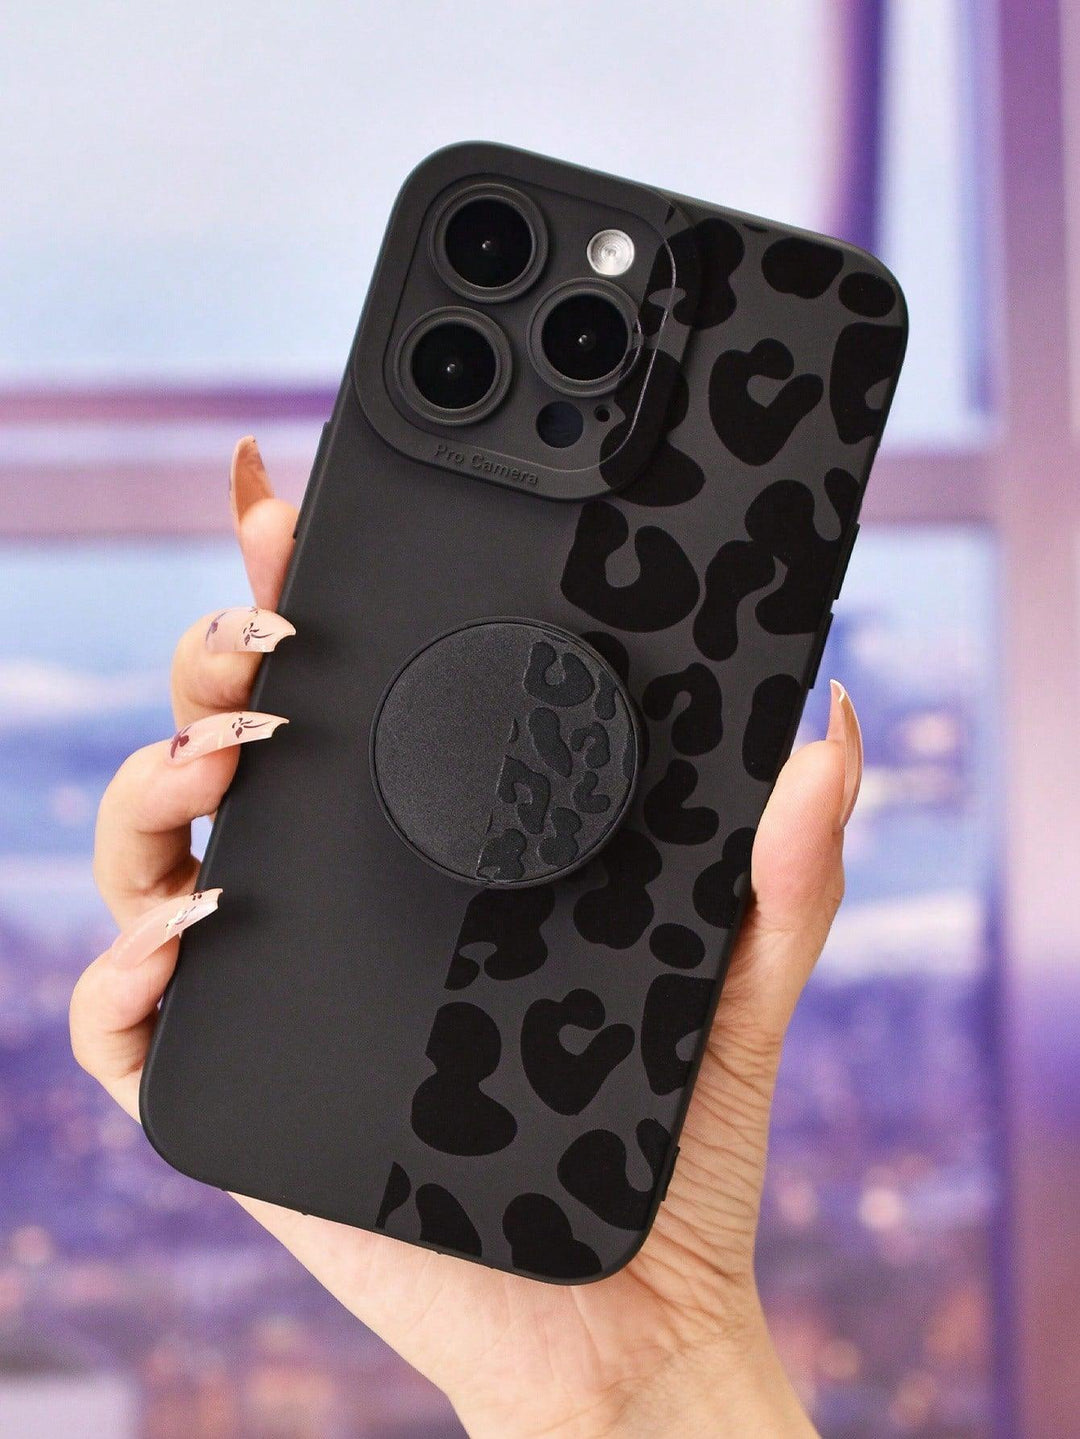 Leopard Print Phone Case With Stand Out Phone Grip - Brand My Case